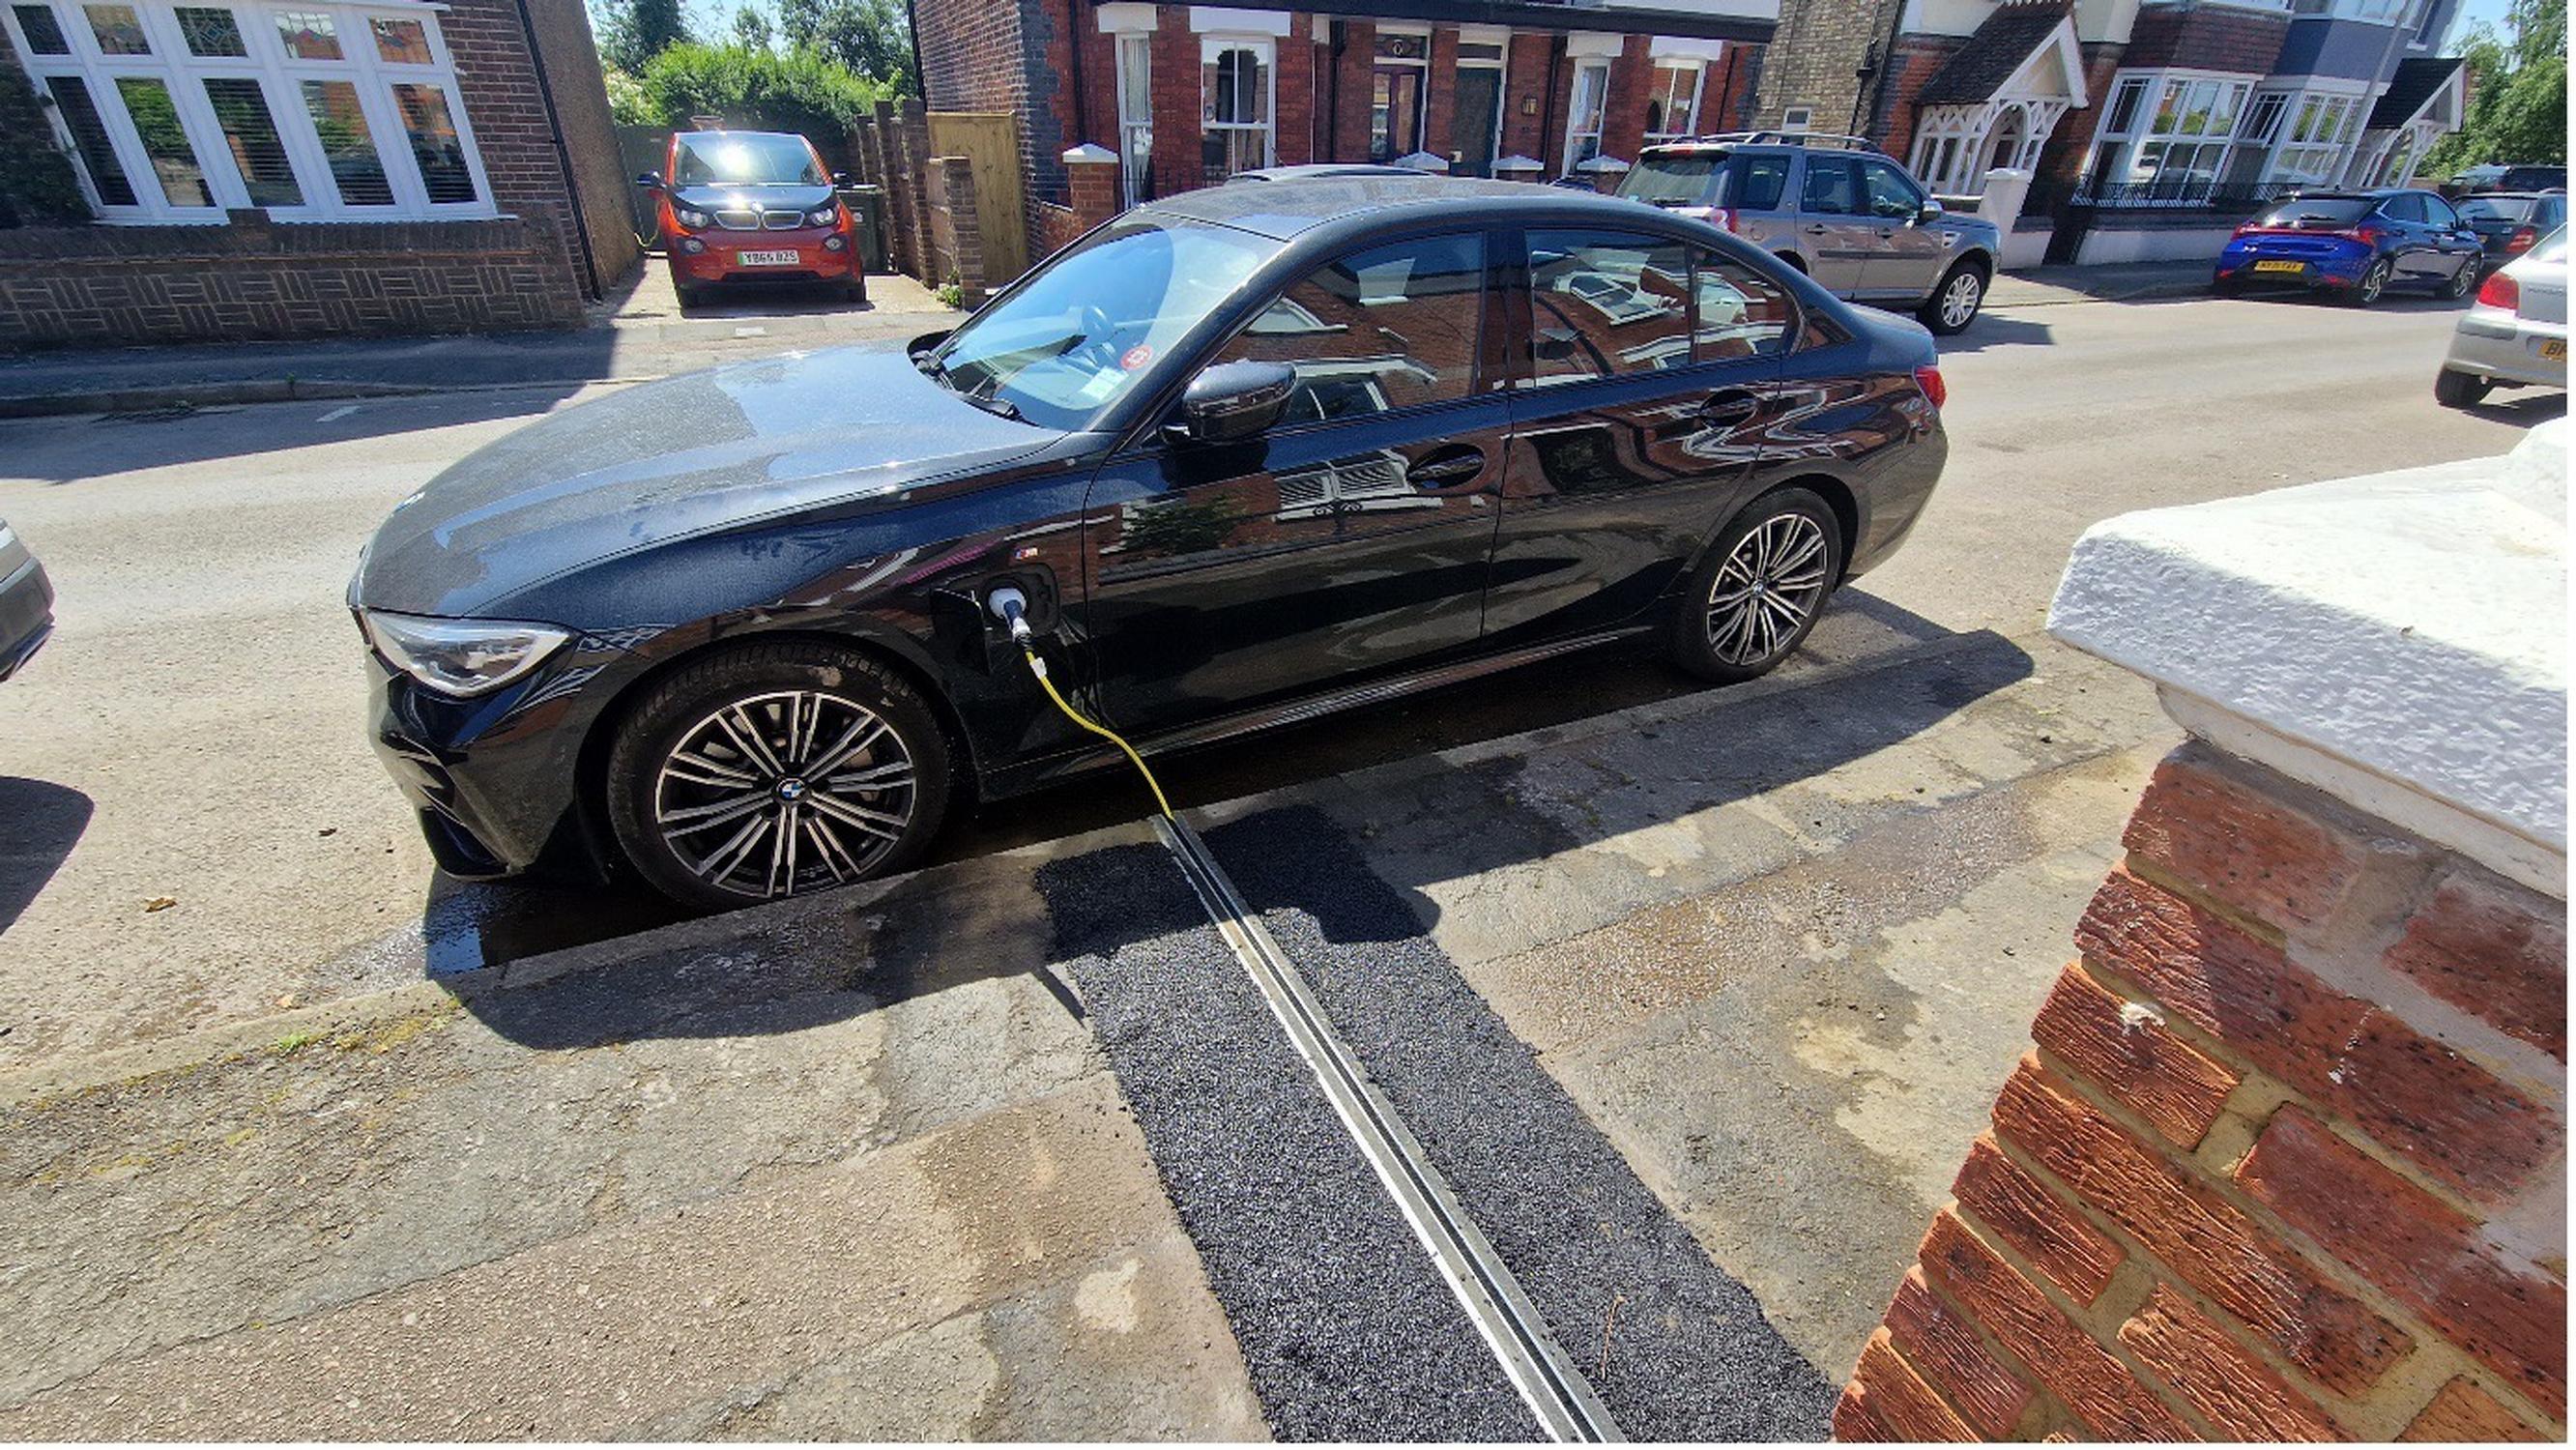 Gul-e electric vehicle charging scheme trialled in Central Bedfordshire